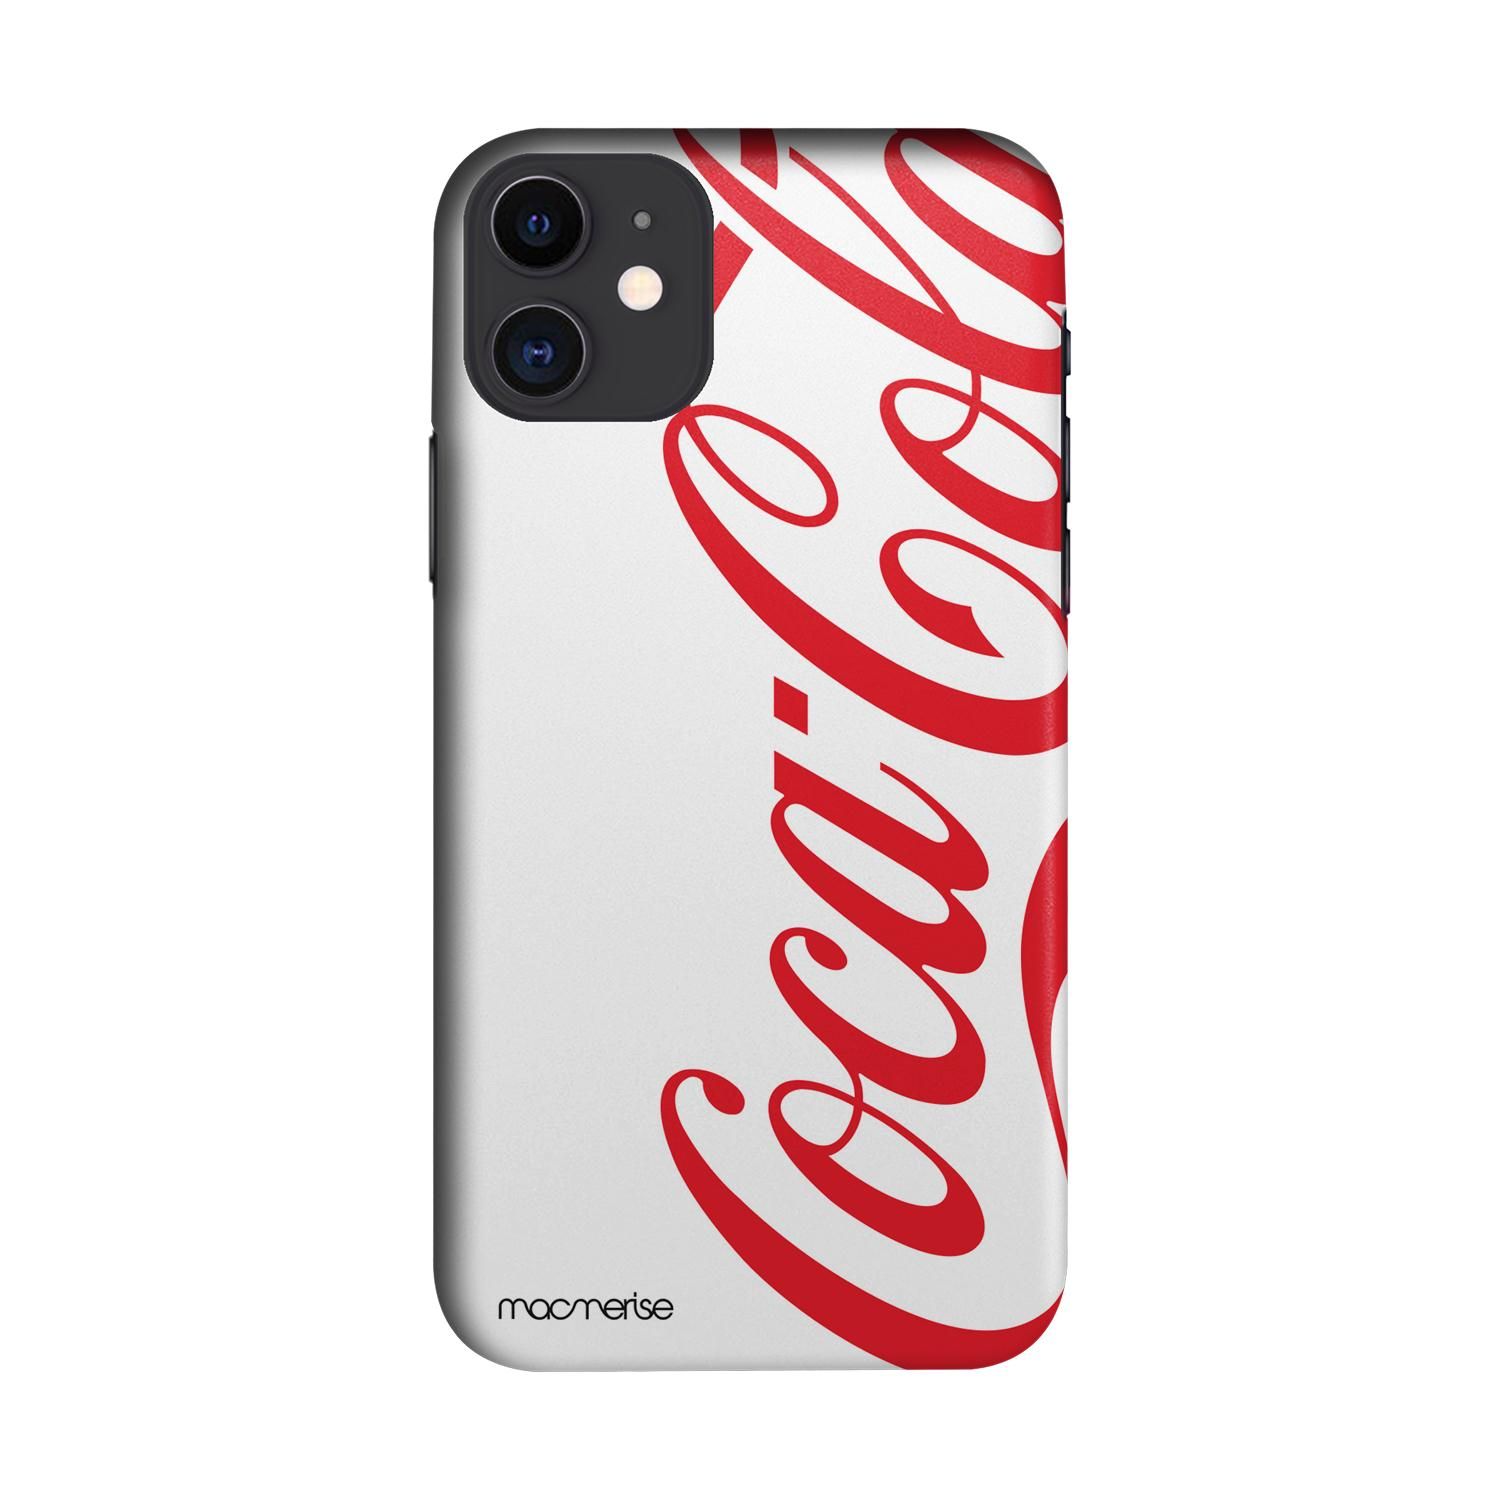 Best Apple Iphone 11 Mobile Covers Buy Apple Iphone 11 Coke White Red Online On Macmerise Indi A